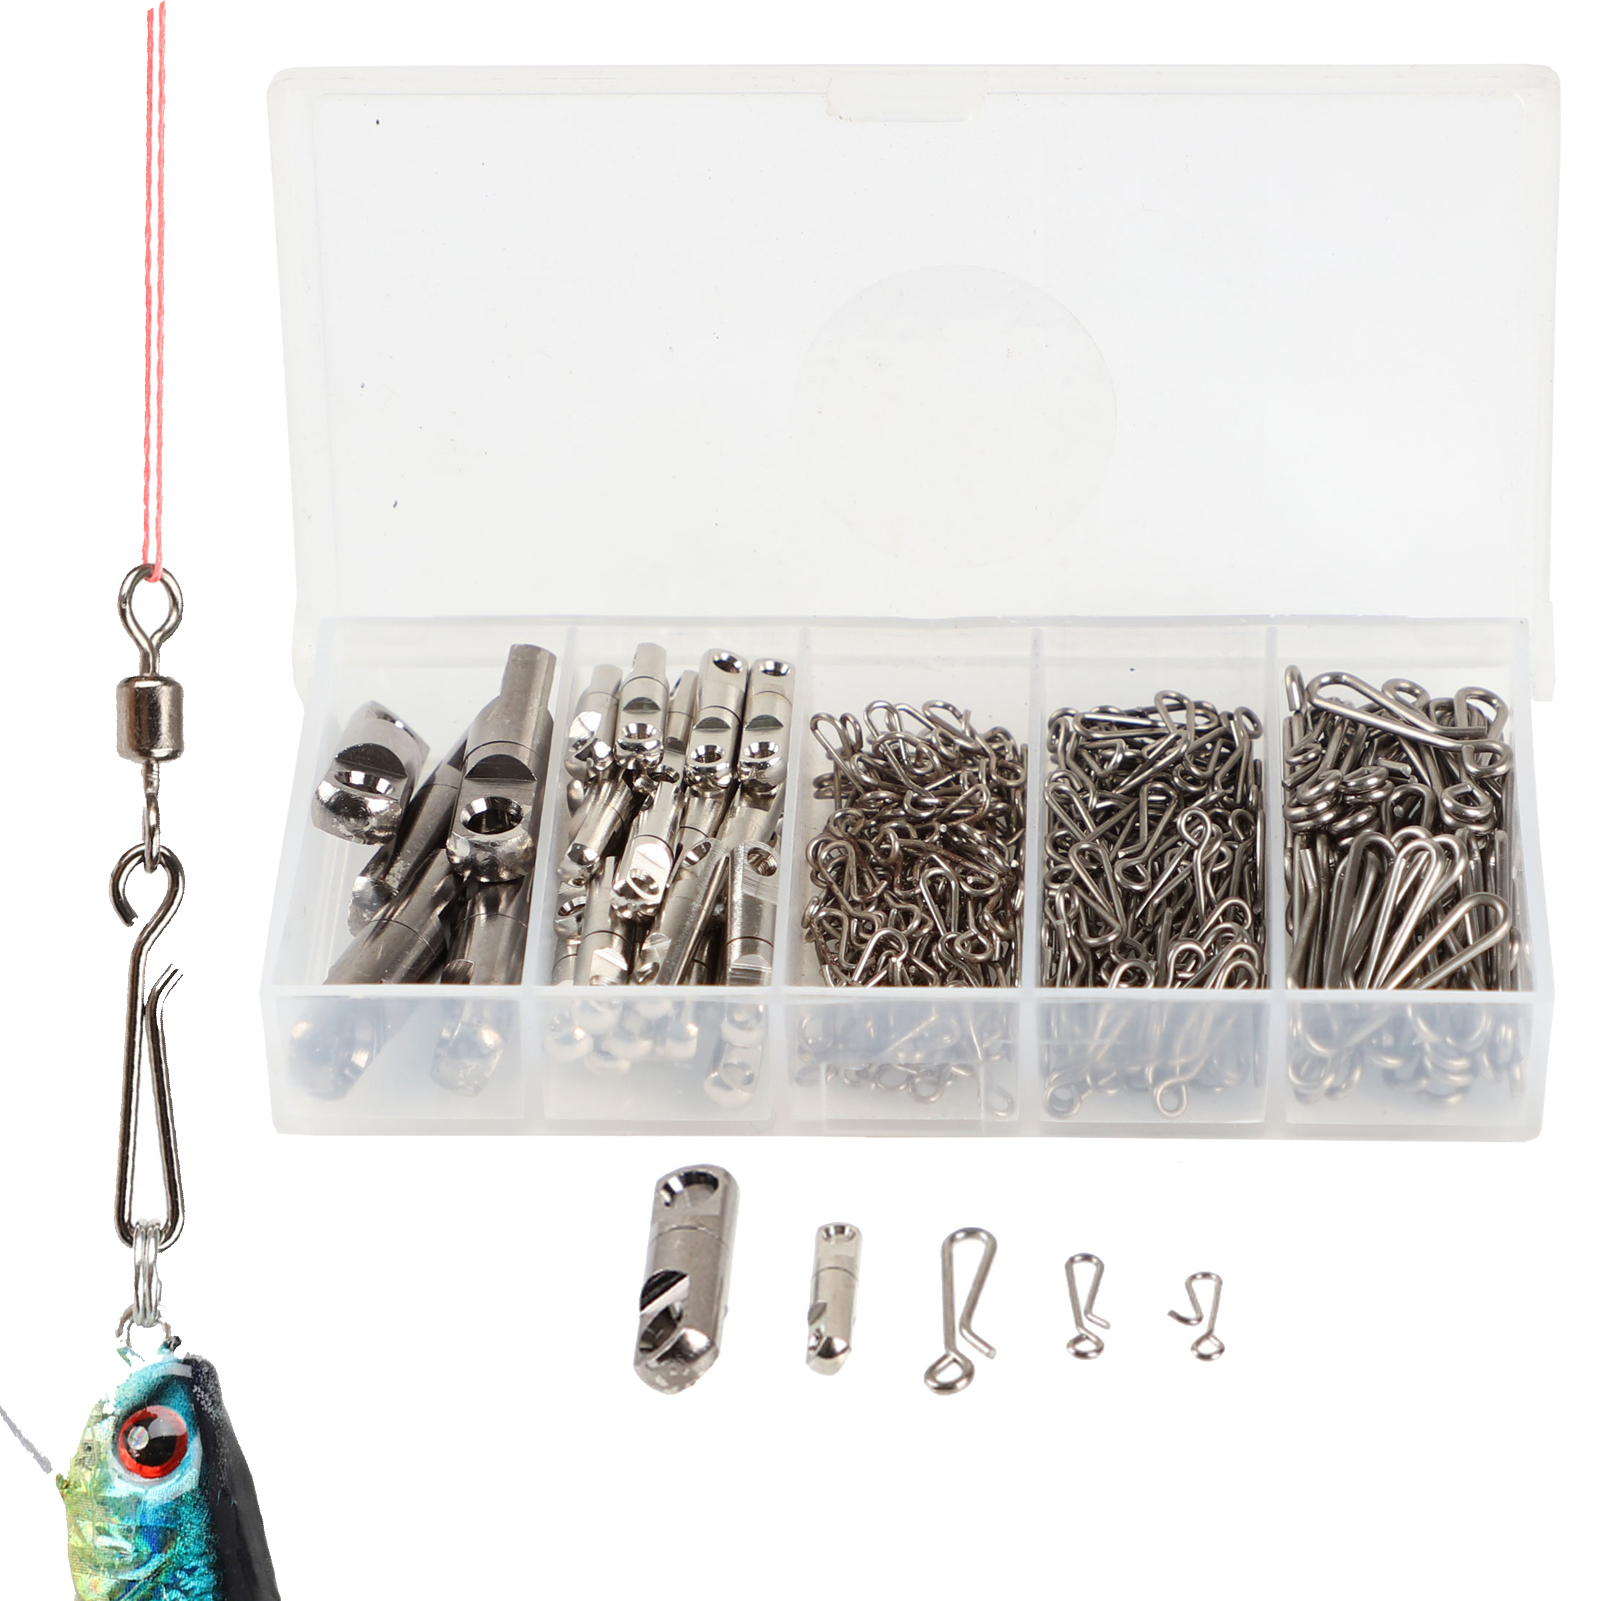 FREE FISHER 285Pcs Rotary Bearing Swivel and Bearing Lock Rolling Swivel Pin Ring Snap Set with Box Tackle Connector Fishing Accessories